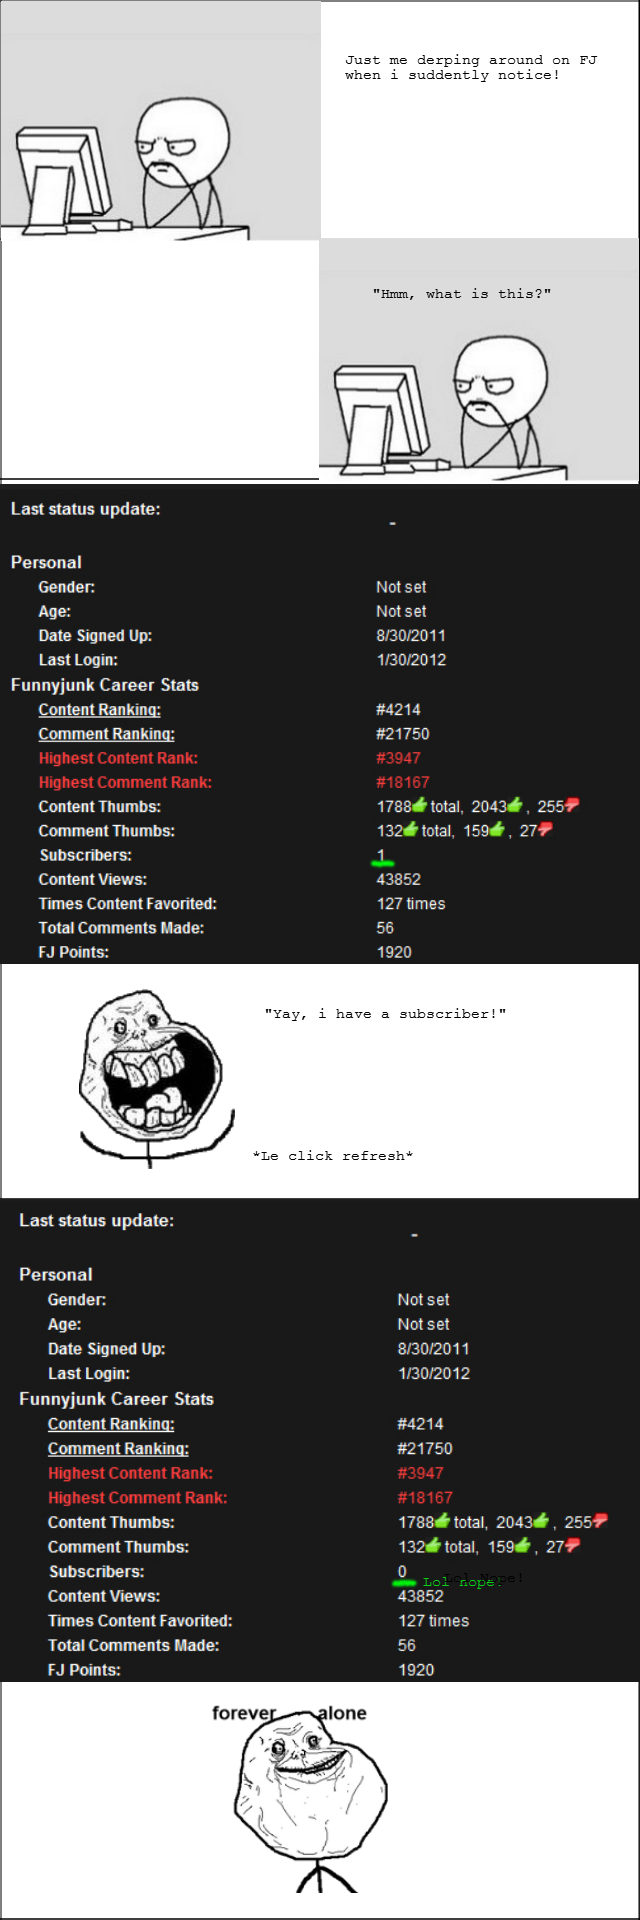 Troll FunnyJunk. I were so happy for a moment..... Just me derping around on am when i suddently notice! Hmm, what is this?" I ast status. update: Personal Gend